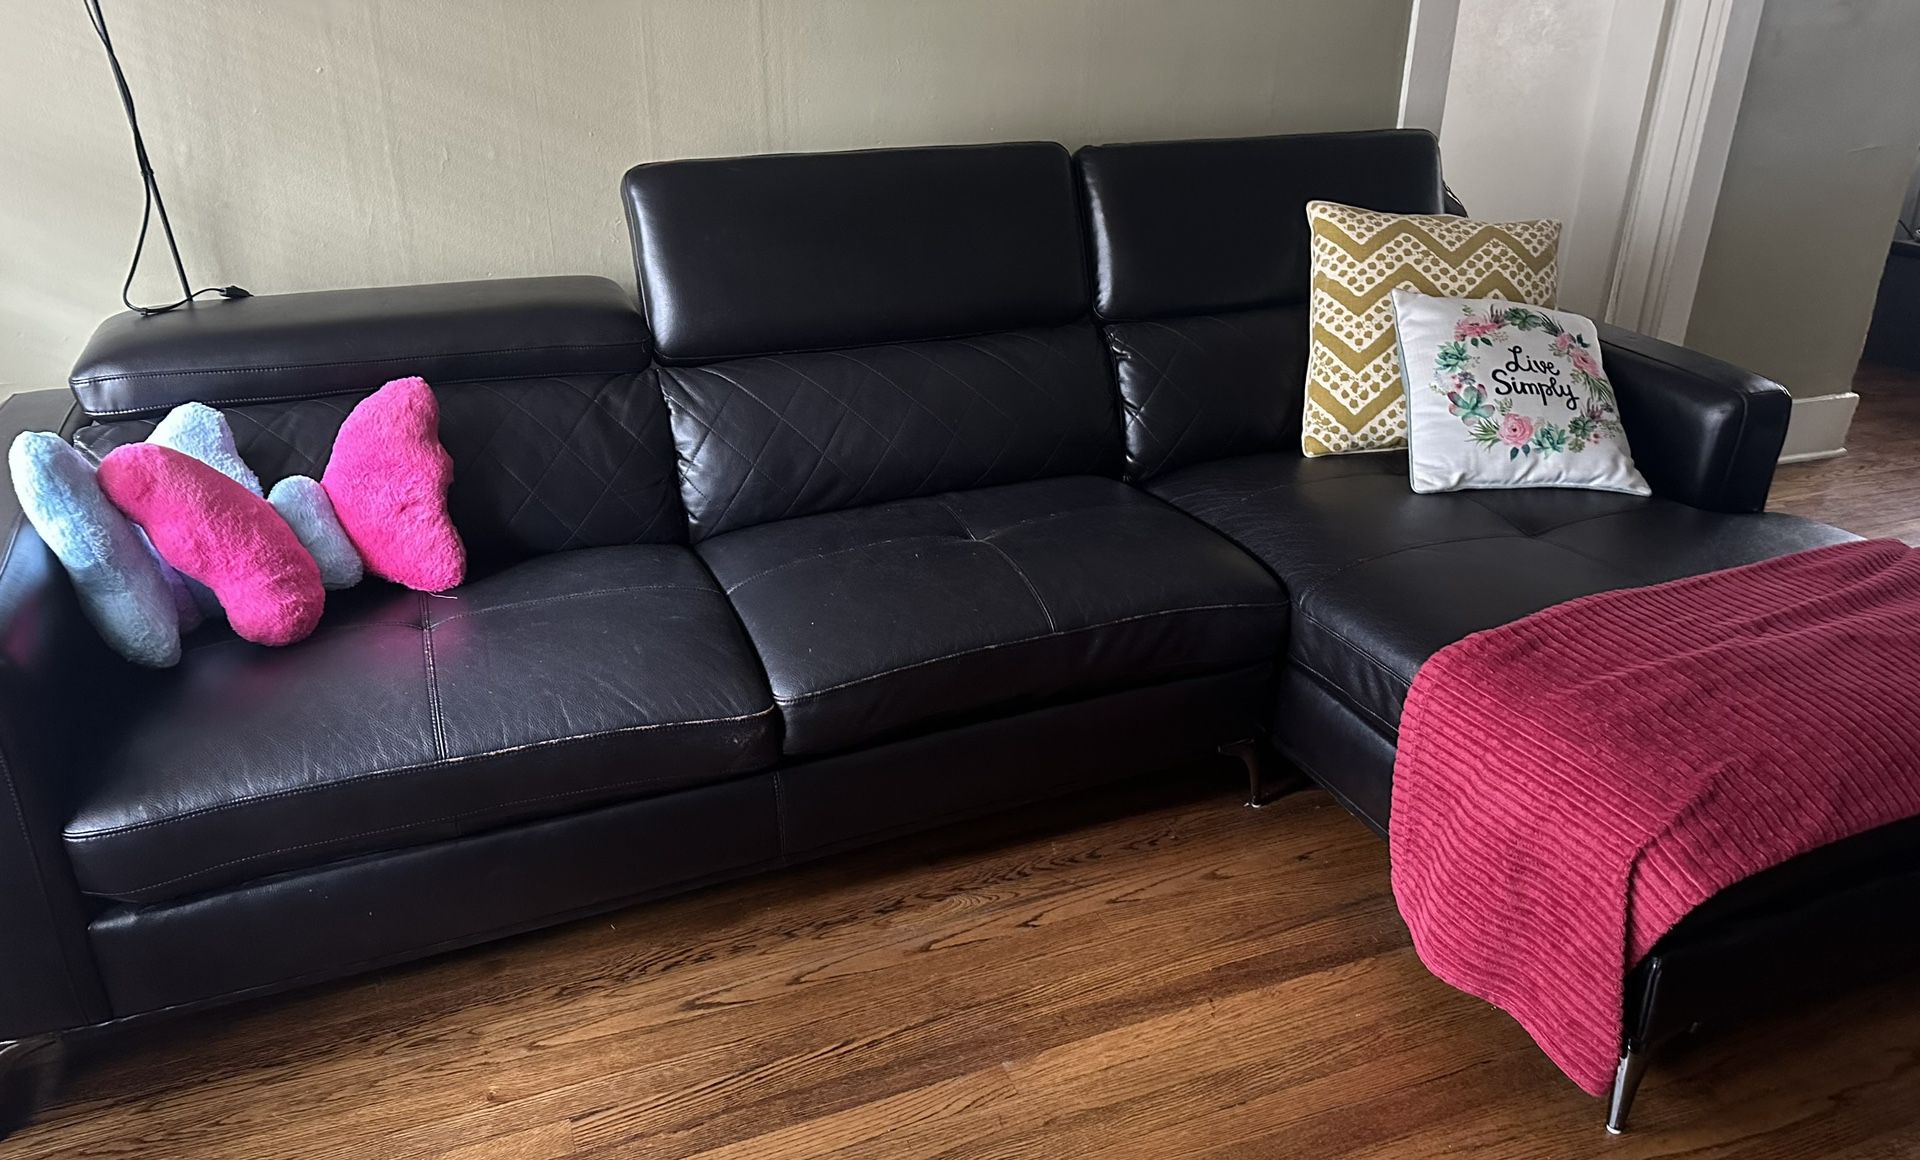 Sectional Black Couch